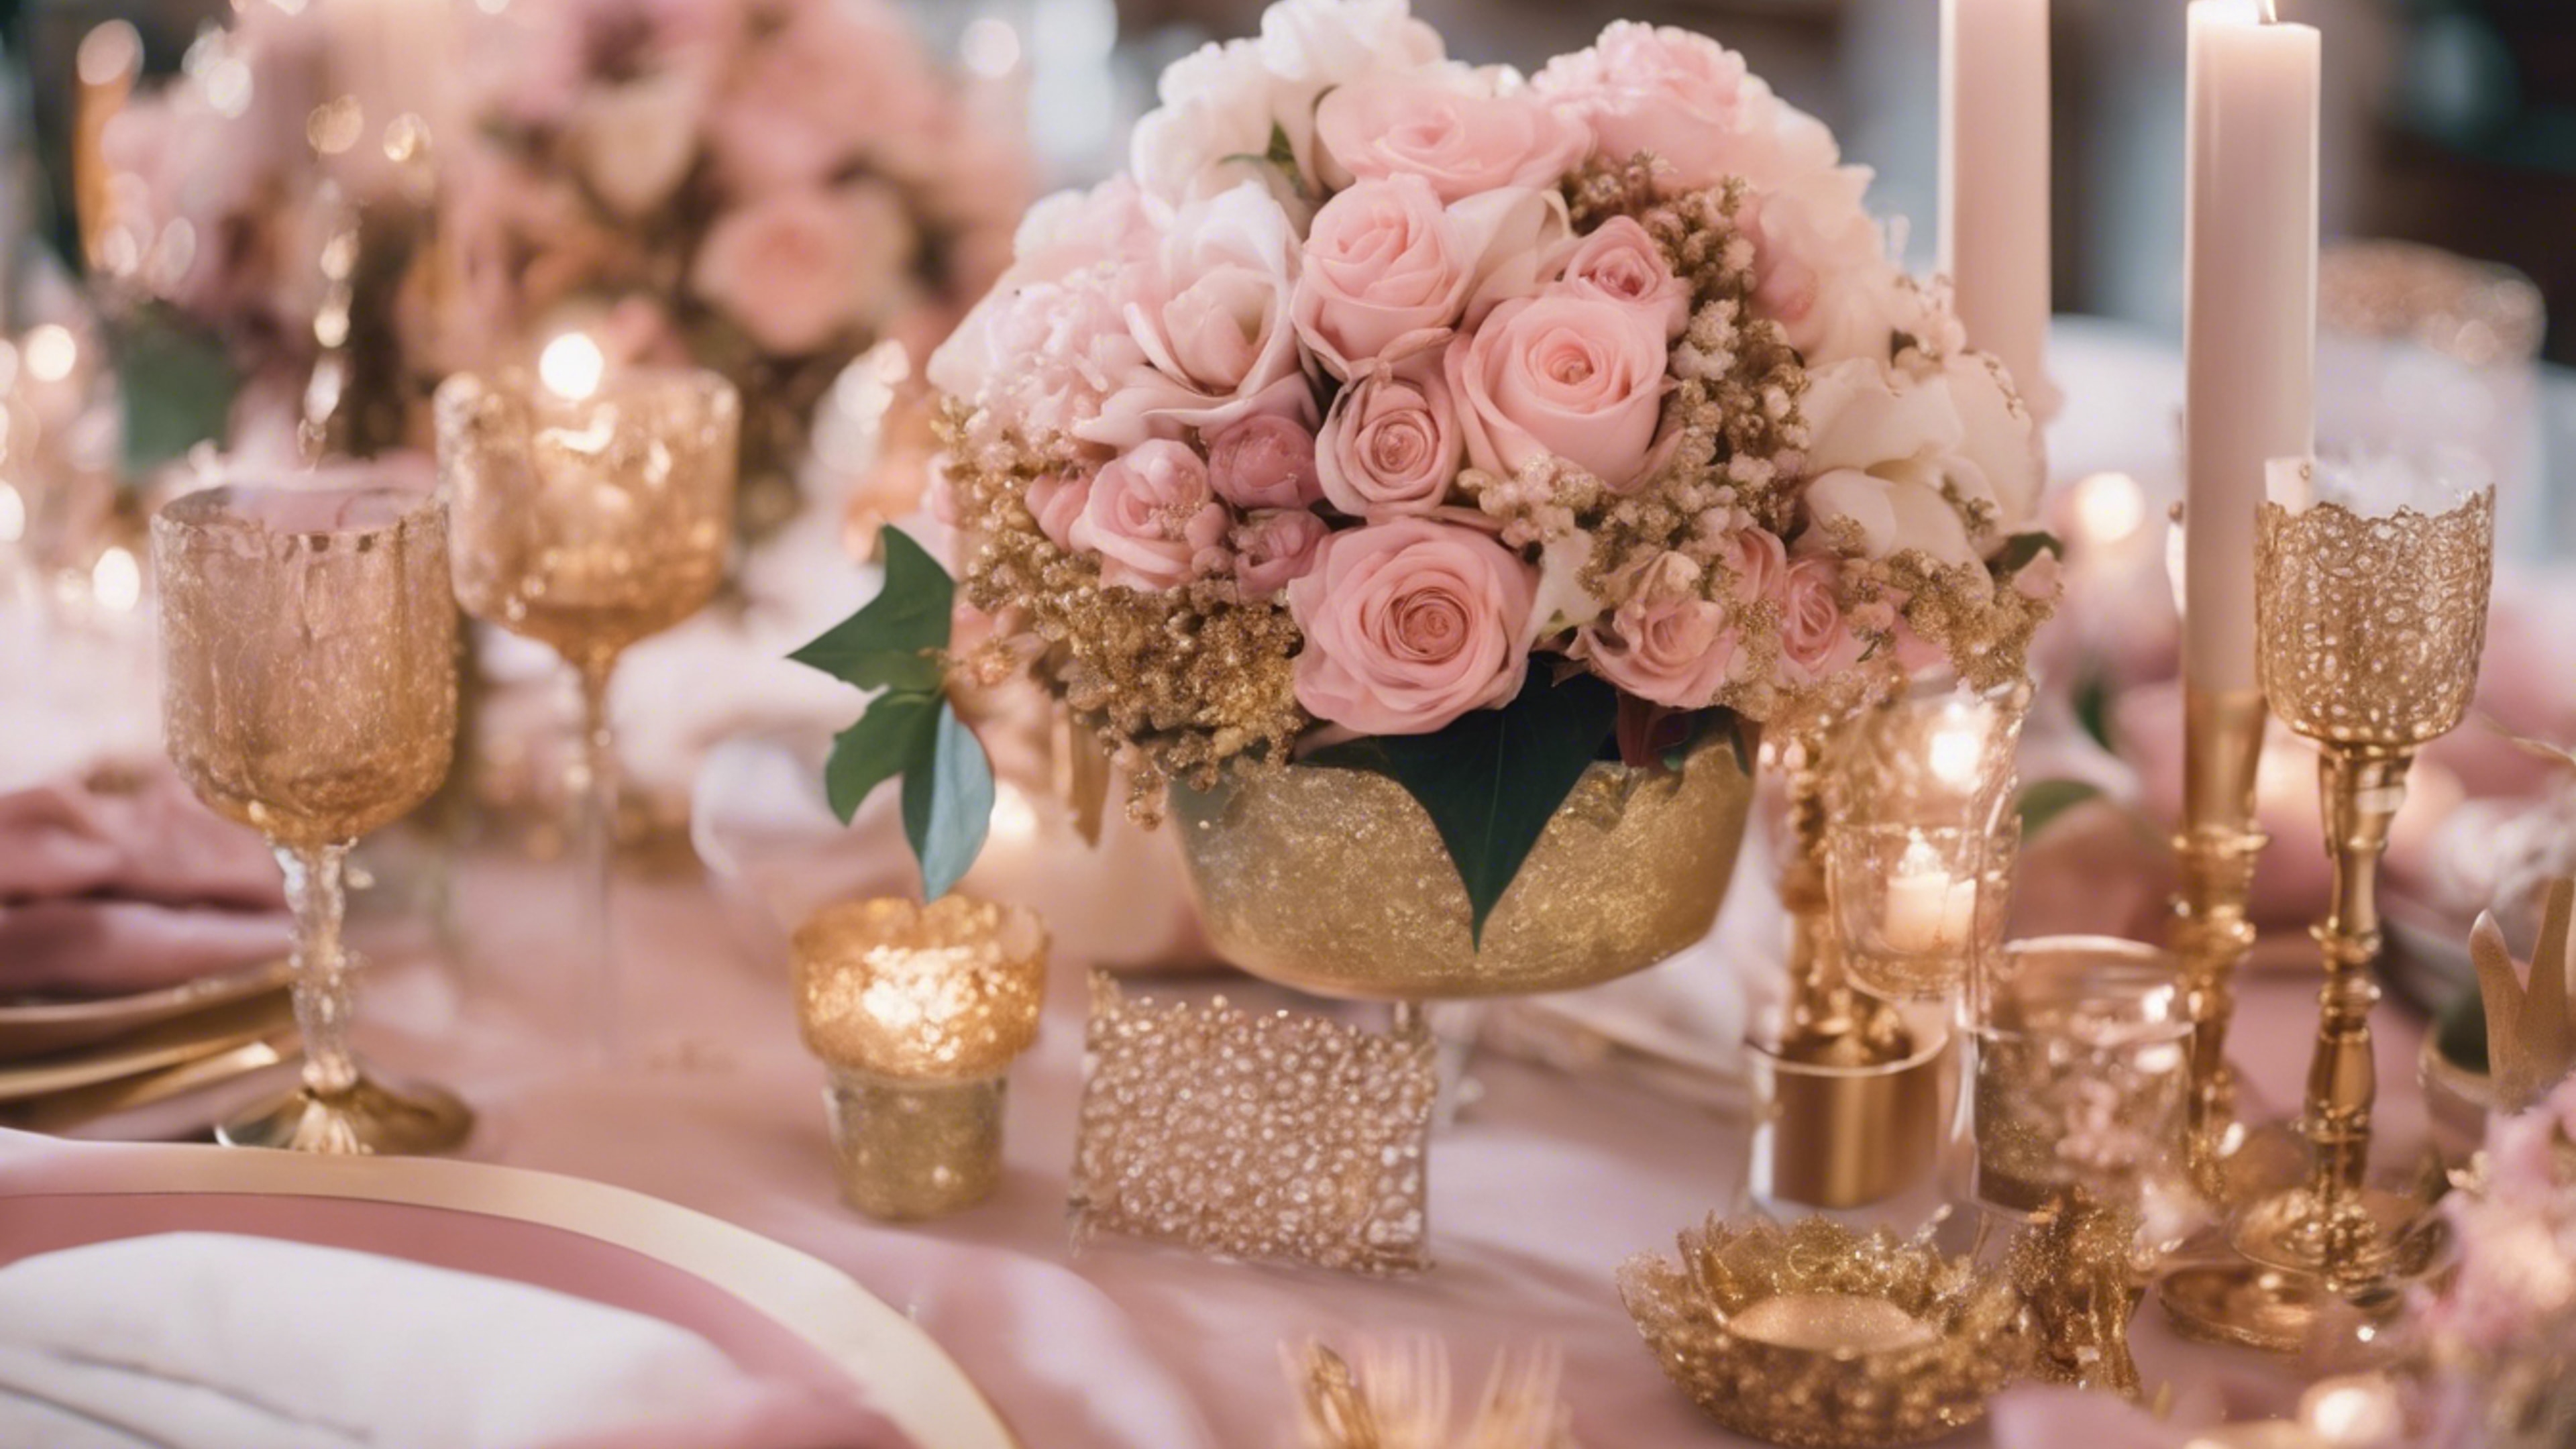 An ethereal pink and gold themed wedding decorations with flowers and metallic accents.壁紙[814998f188fb45f48f1c]